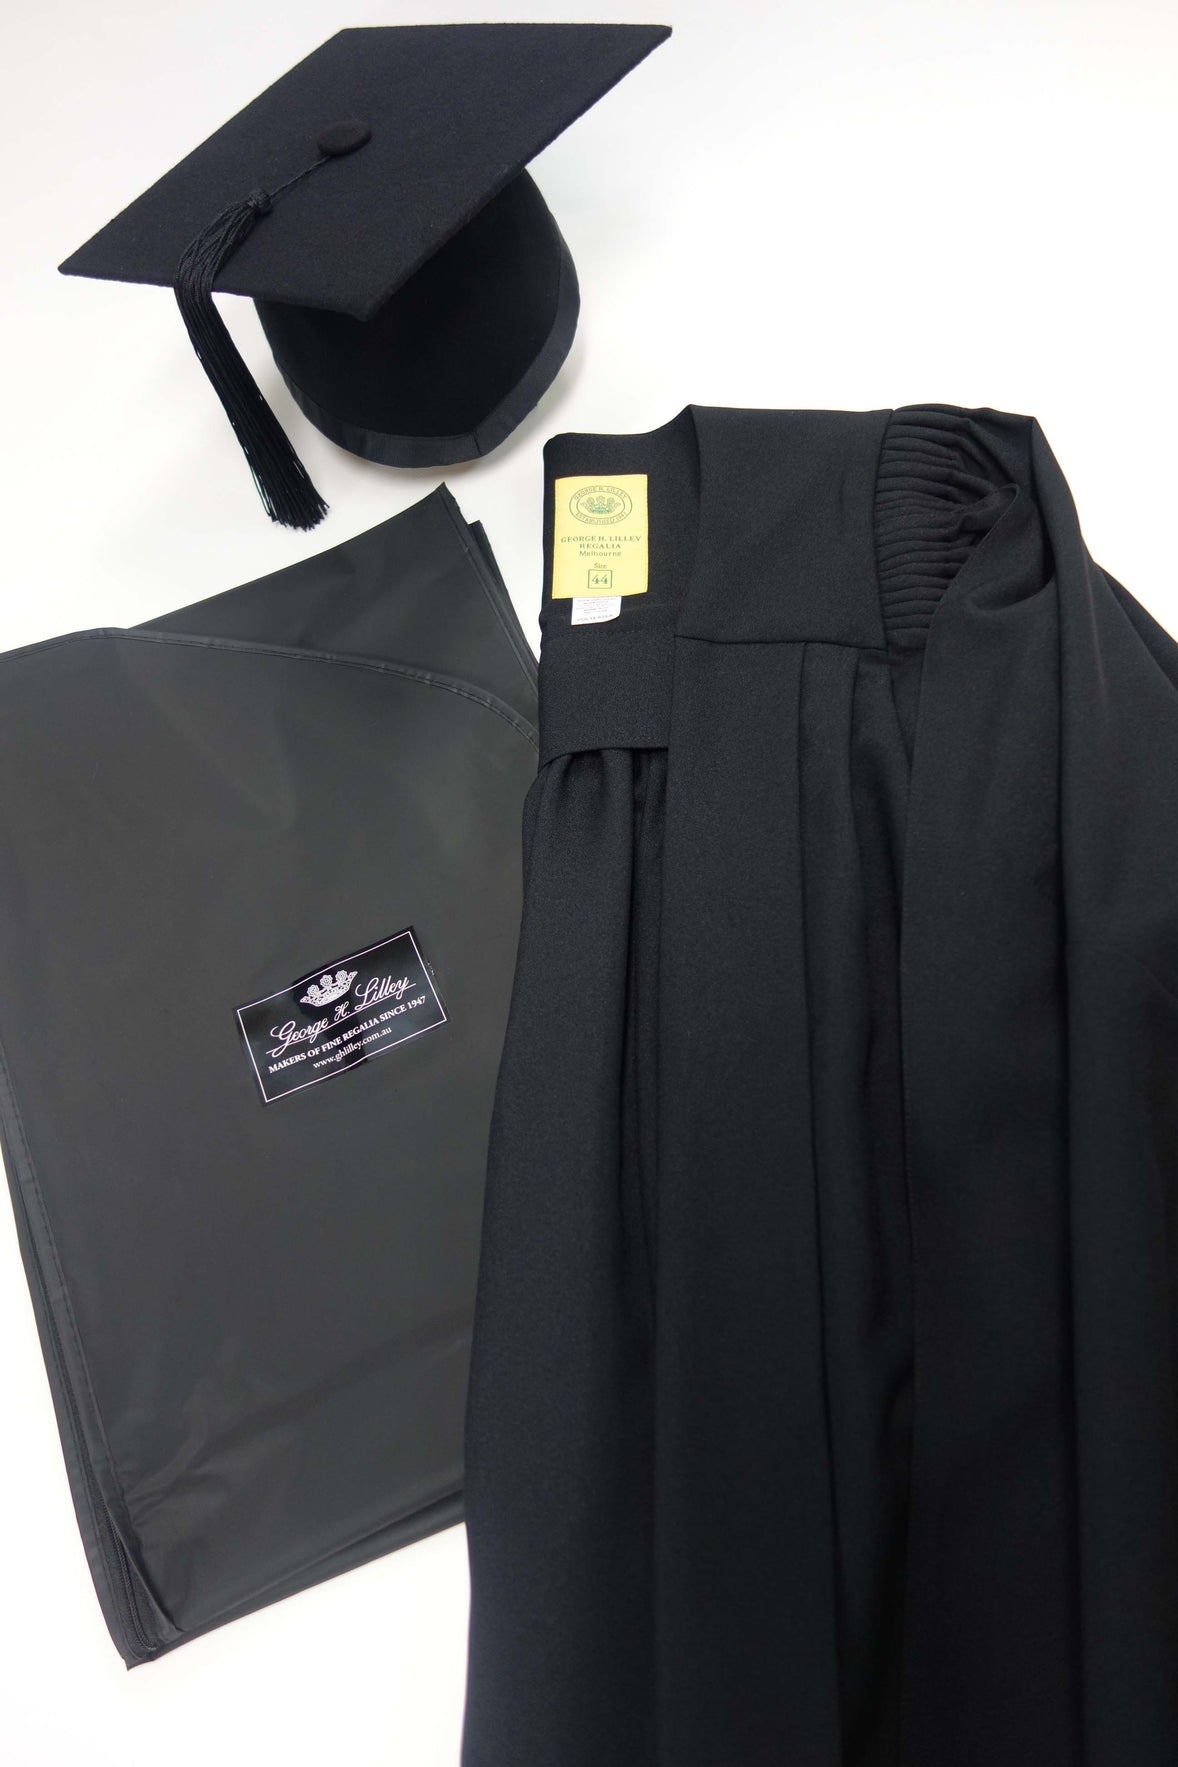 Buy Master Graduation Gown and Mortar Board Set Online at George H Lilley™️